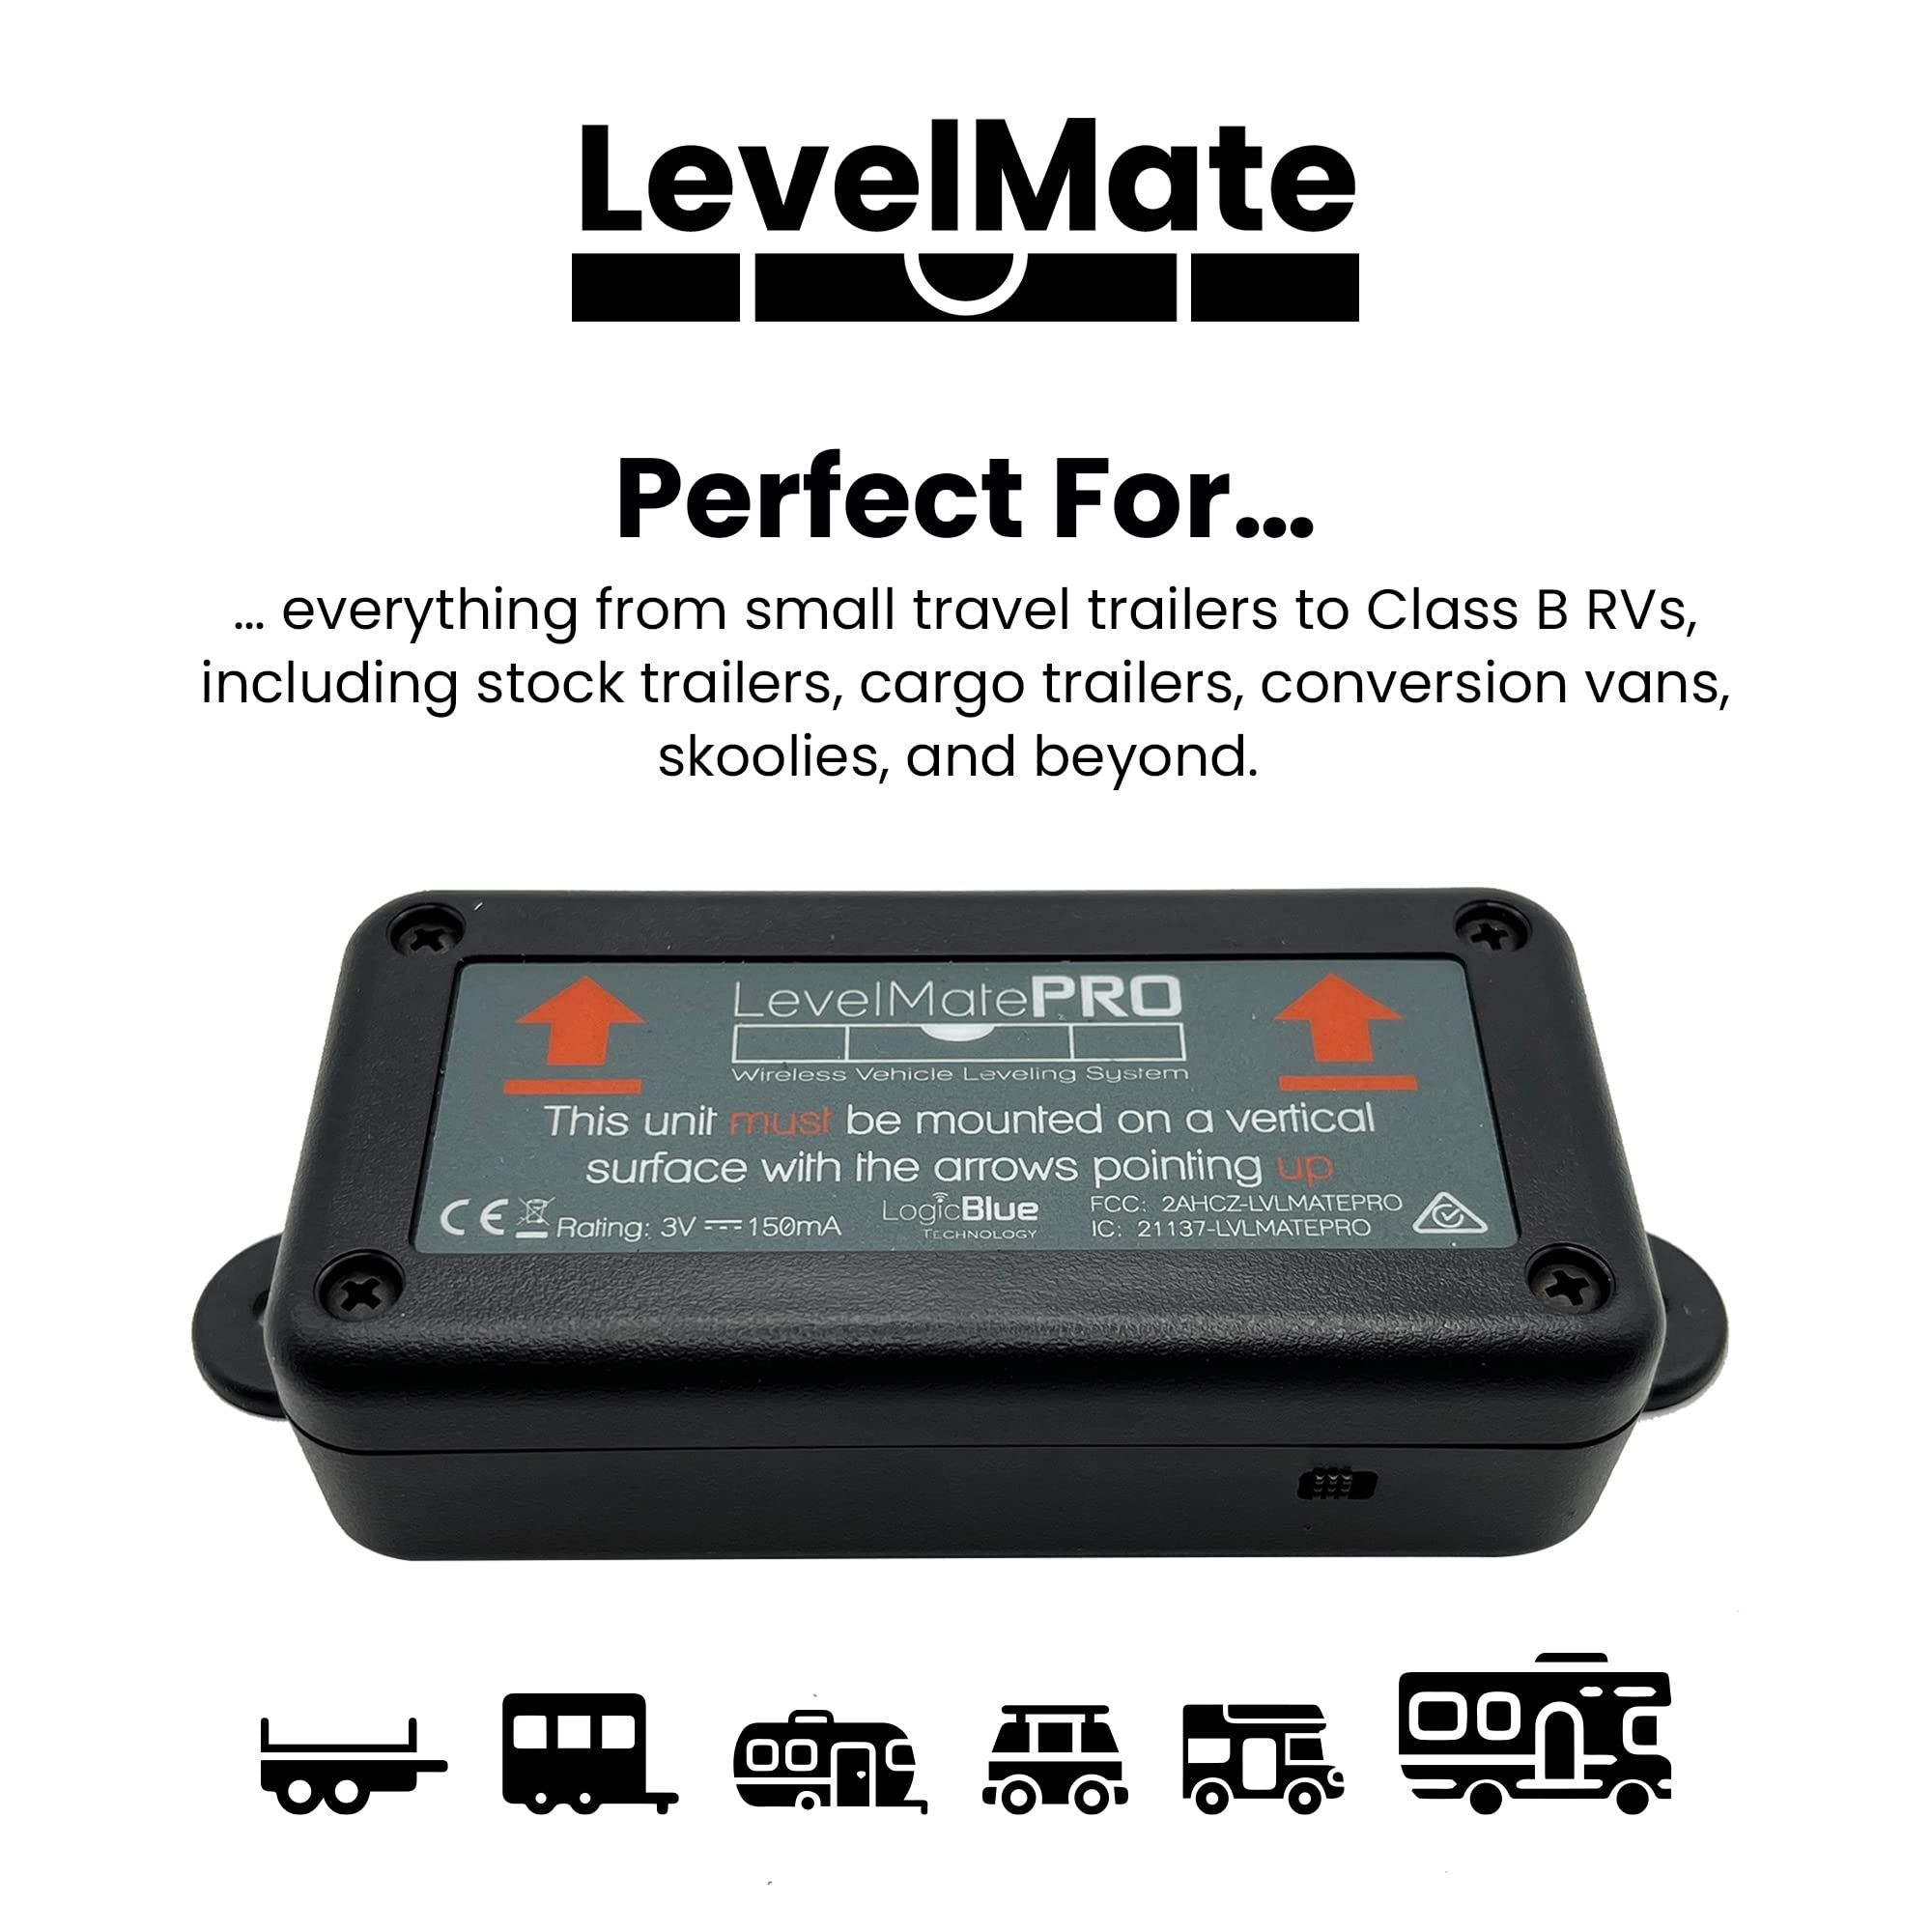 LogicBlue Technology LevelMatePRO Wireless Vehicle RV Leveling System - Patented Quick and Easy Smartphone Leveling Tool – Travel Trailer Accessories for RV Camping